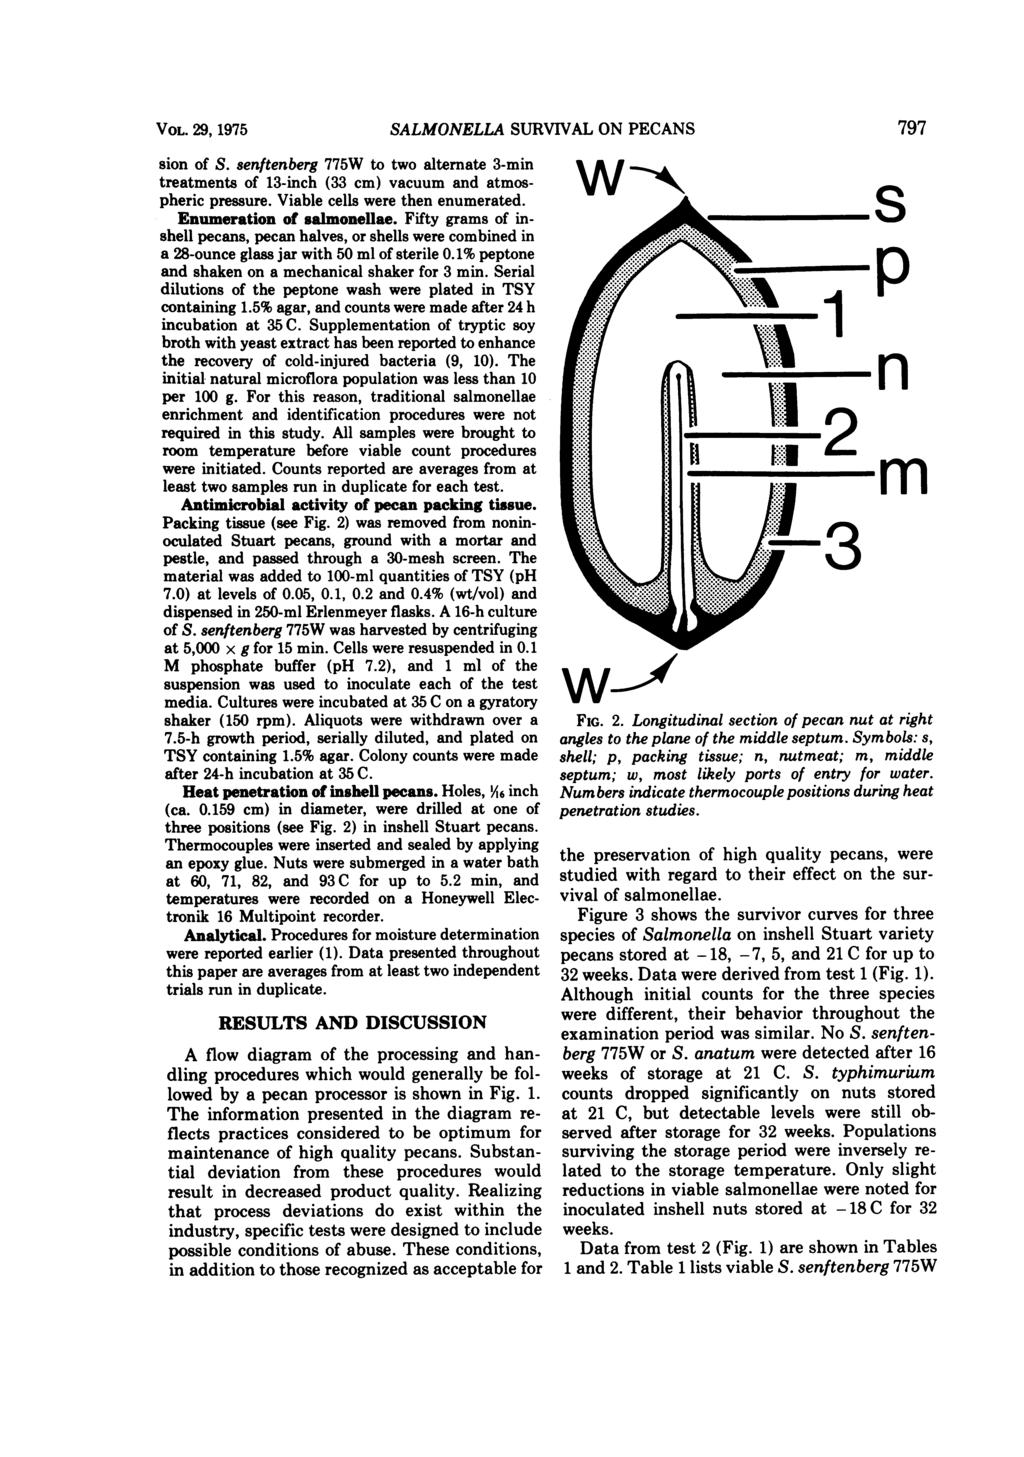 VOL. 29, 1975 SALMONELLA SURVIVAL ON PECANS 797 sion of S. senftenberg 775W to two alternate 3-min treatments of 13-inch (33 cm) vacuum and atmospheric pressure. Viable cells were then enumerated.